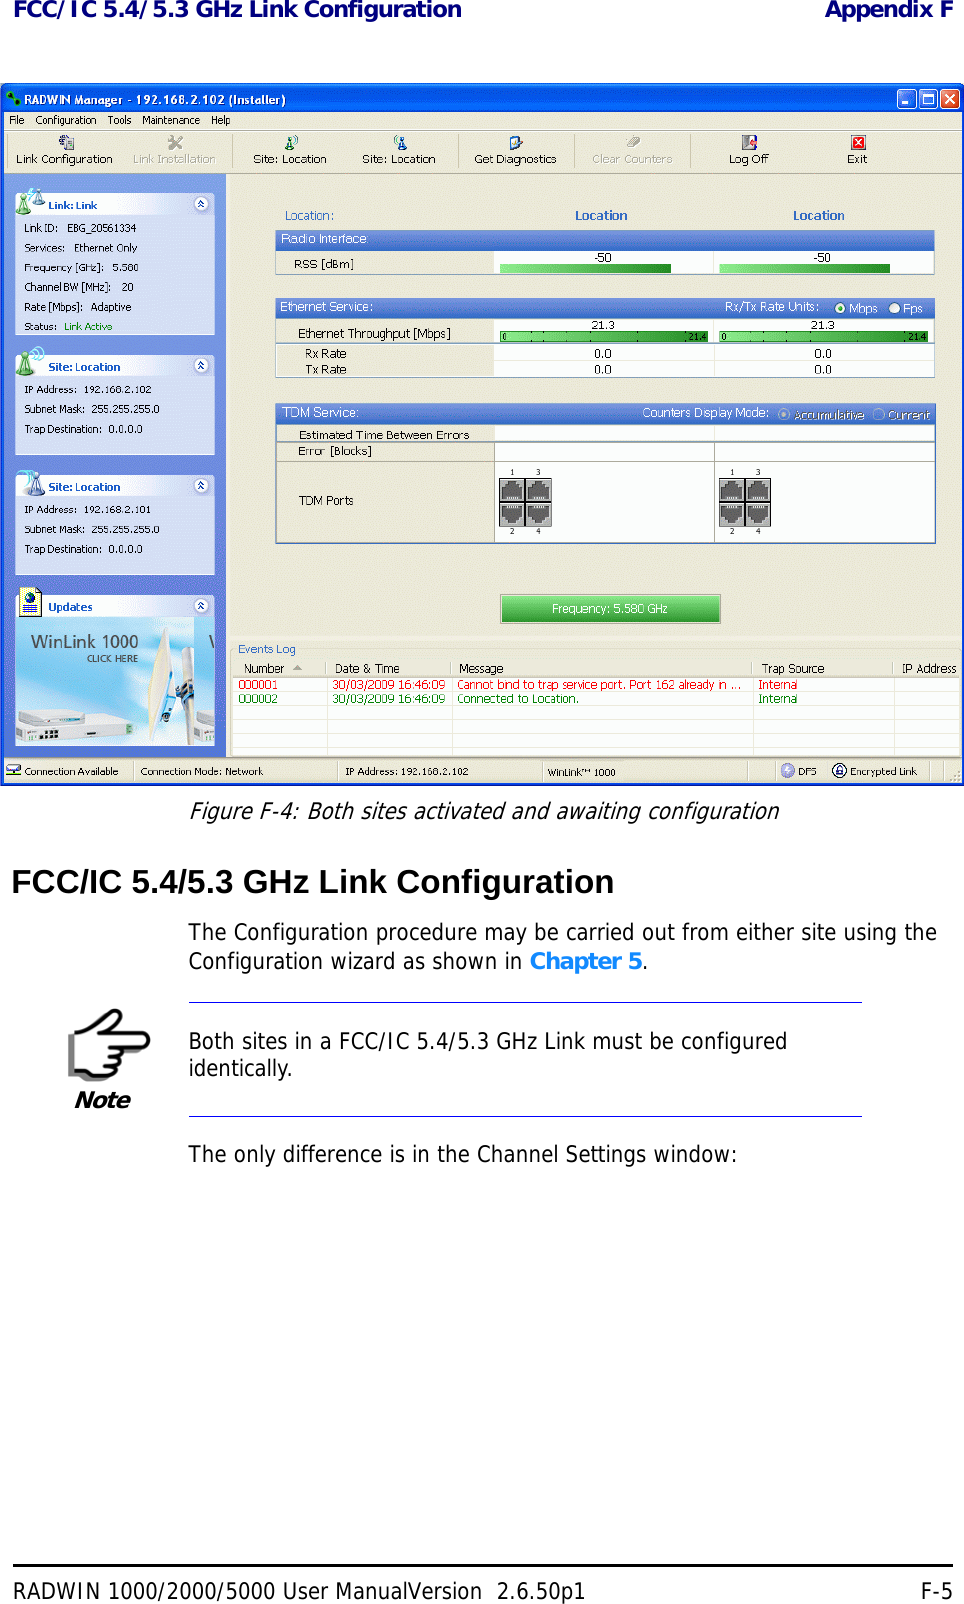 FCC/IC 5.4/5.3 GHz Link Configuration Appendix FRADWIN 1000/2000/5000 User ManualVersion  2.6.50p1 F-5Figure F-4: Both sites activated and awaiting configurationFCC/IC 5.4/5.3 GHz Link ConfigurationThe Configuration procedure may be carried out from either site using the Configuration wizard as shown in Chapter 5. The only difference is in the Channel Settings window:NoteBoth sites in a FCC/IC 5.4/5.3 GHz Link must be configured identically.